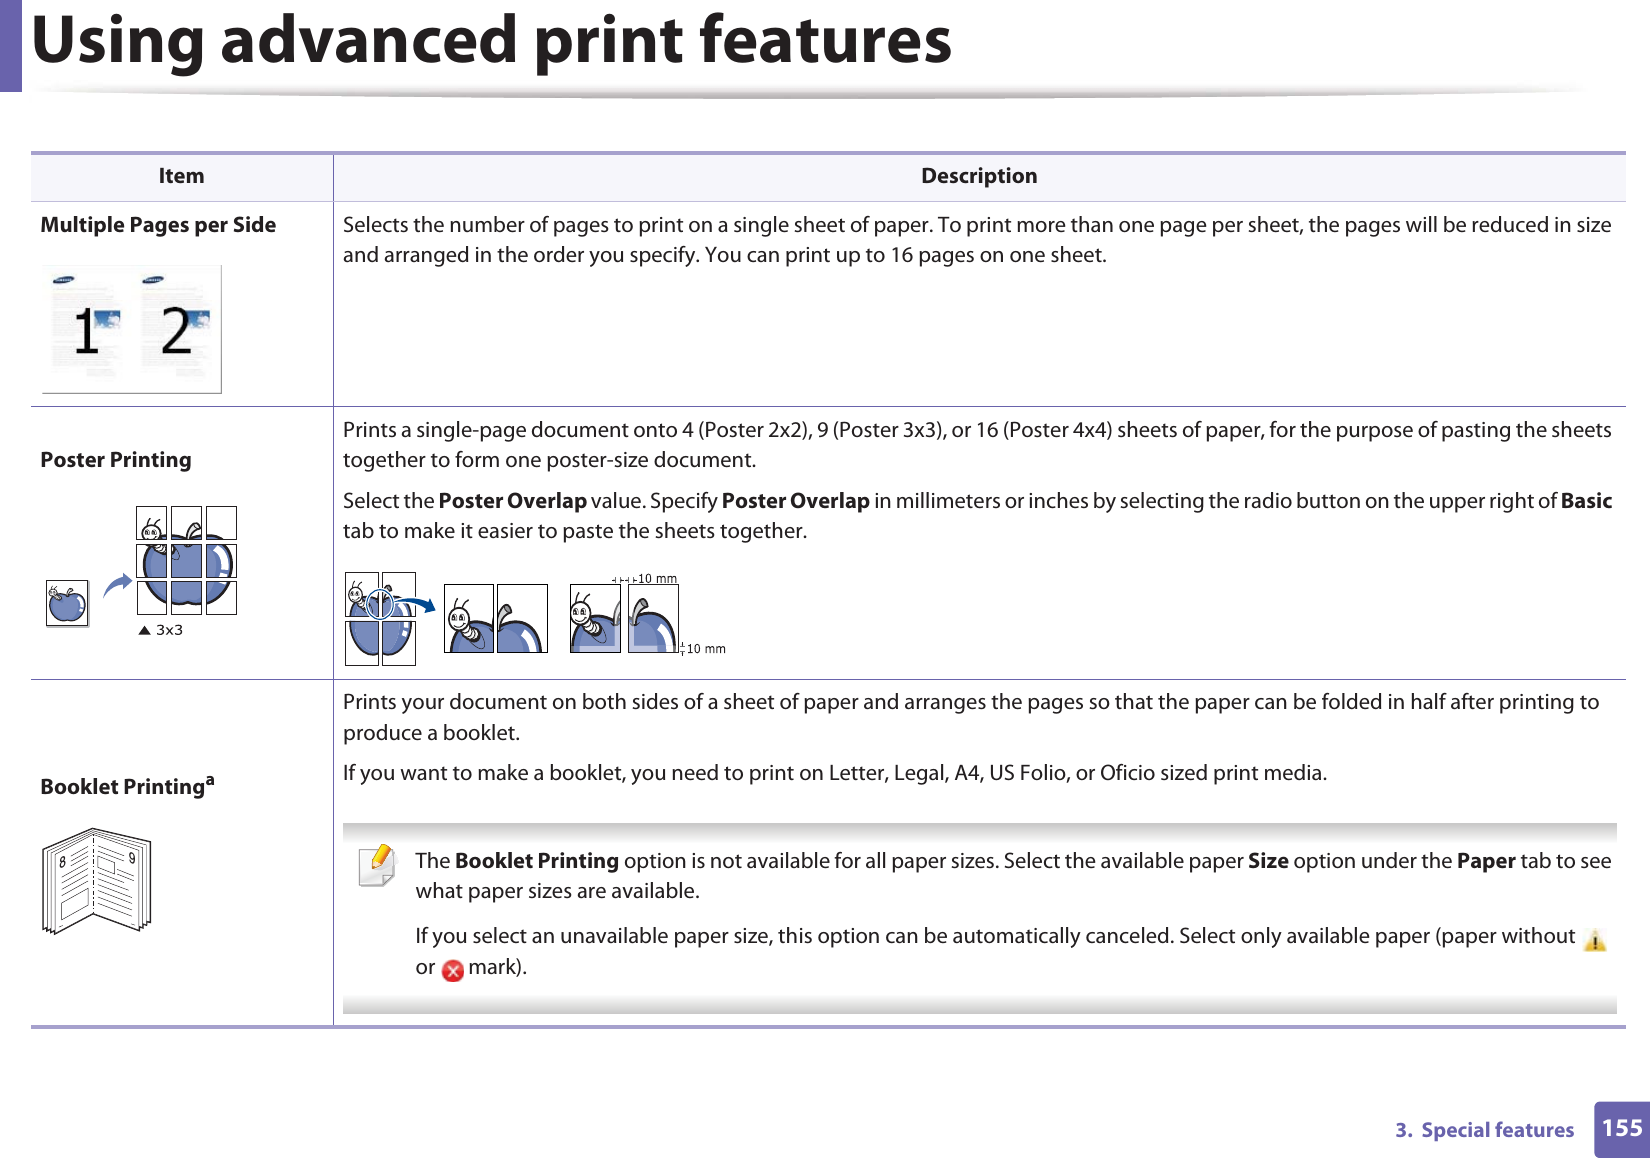 Using advanced print features1553.  Special features Item DescriptionMultiple Pages per Side Selects the number of pages to print on a single sheet of paper. To print more than one page per sheet, the pages will be reduced in size and arranged in the order you specify. You can print up to 16 pages on one sheet. Poster PrintingPrints a single-page document onto 4 (Poster 2x2), 9 (Poster 3x3), or 16 (Poster 4x4) sheets of paper, for the purpose of pasting the sheets together to form one poster-size document.Select the Poster Overlap value. Specify Poster Overlap in millimeters or inches by selecting the radio button on the upper right of Basic tab to make it easier to paste the sheets together.Booklet PrintingaPrints your document on both sides of a sheet of paper and arranges the pages so that the paper can be folded in half after printing to produce a booklet.If you want to make a booklet, you need to print on Letter, Legal, A4, US Folio, or Oficio sized print media.  The Booklet Printing option is not available for all paper sizes. Select the available paper Size option under the Paper tab to see what paper sizes are available.If you select an unavailable paper size, this option can be automatically canceled. Select only available paper (paper without   or  mark). 89